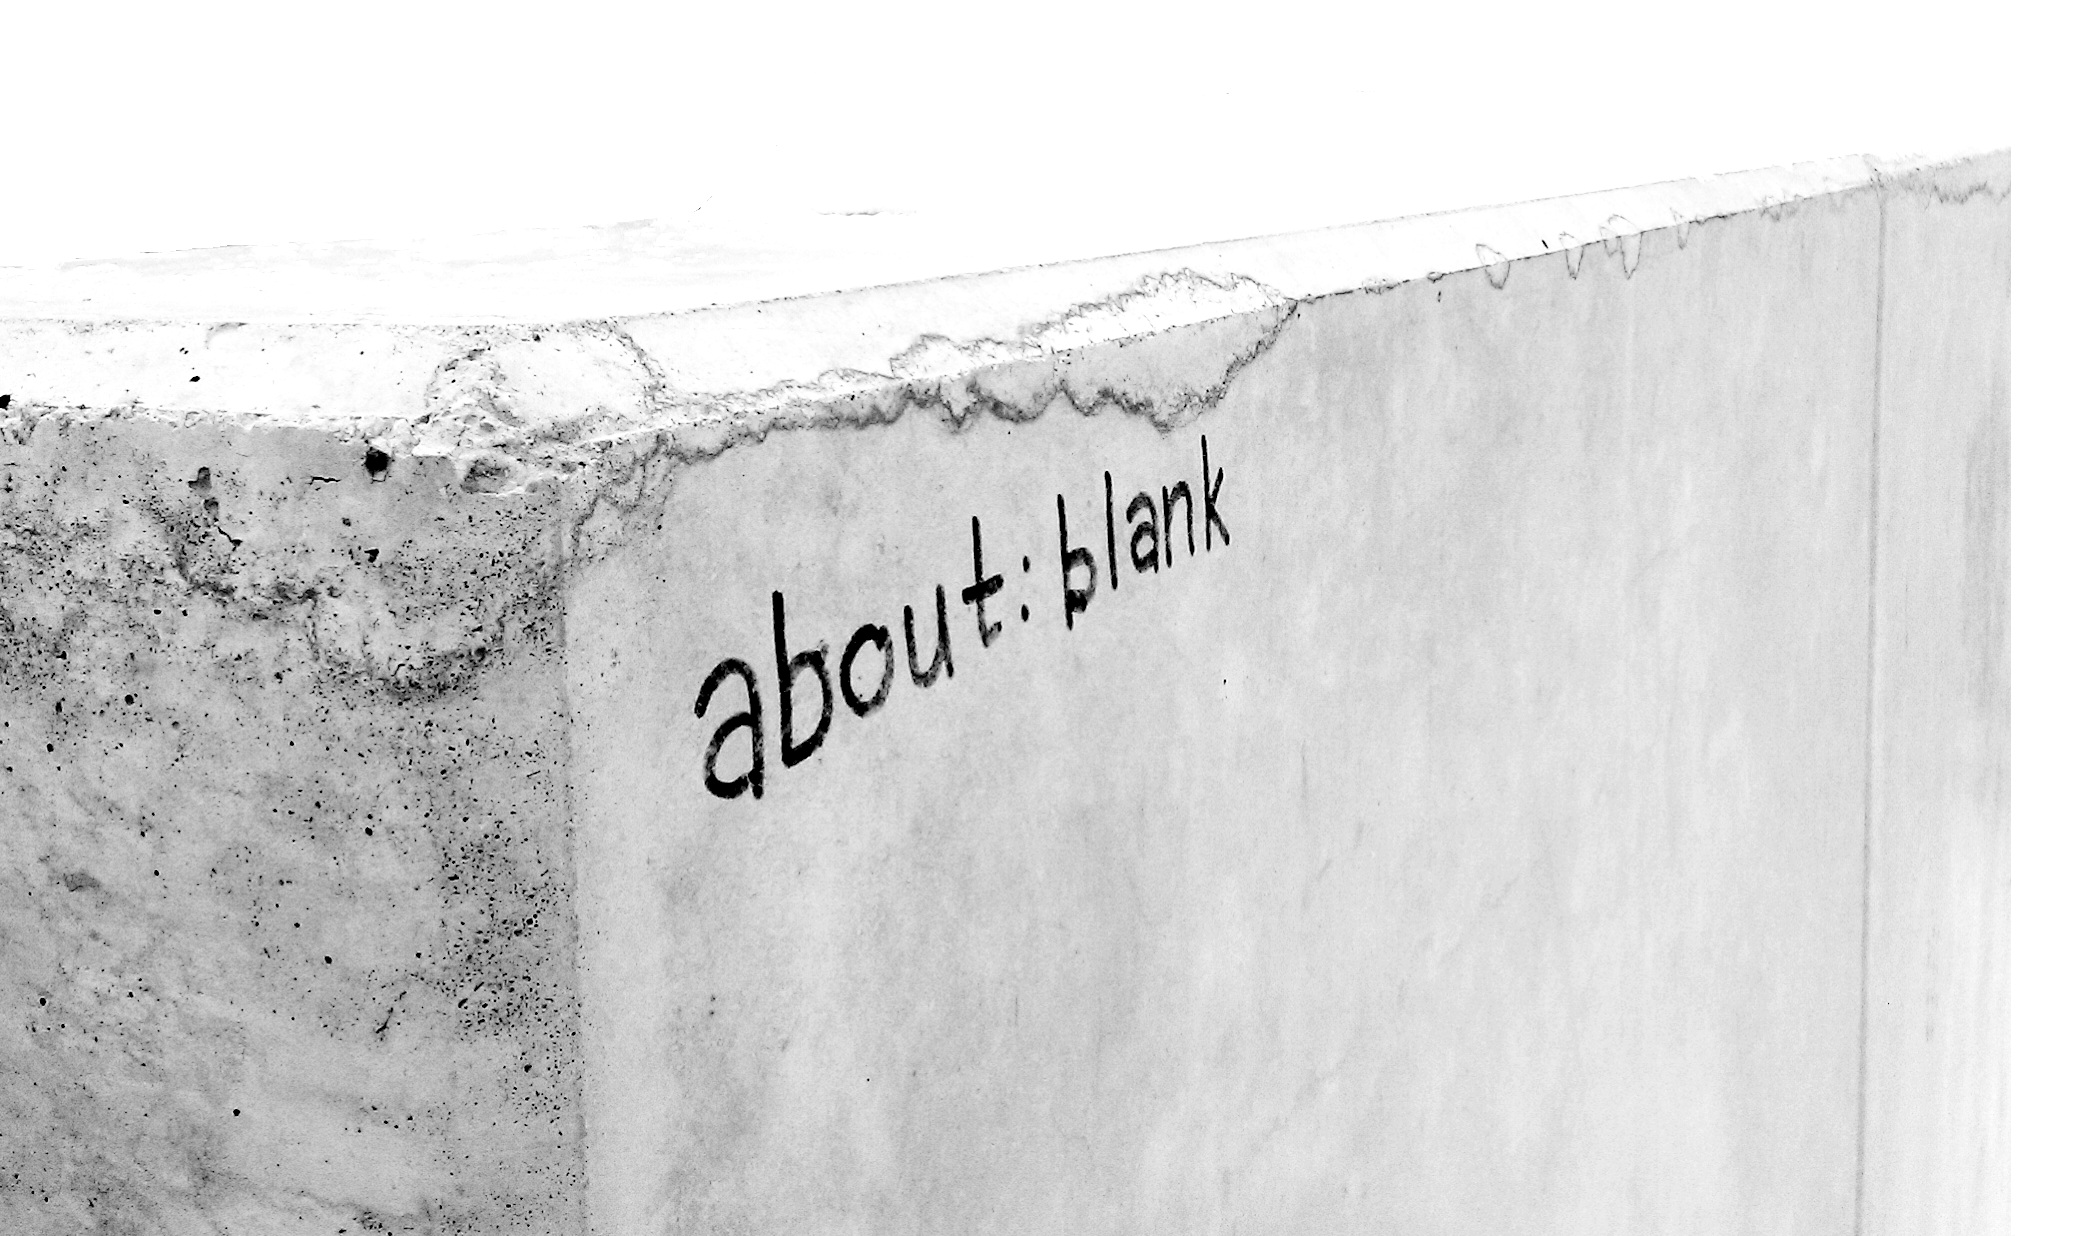 about blank